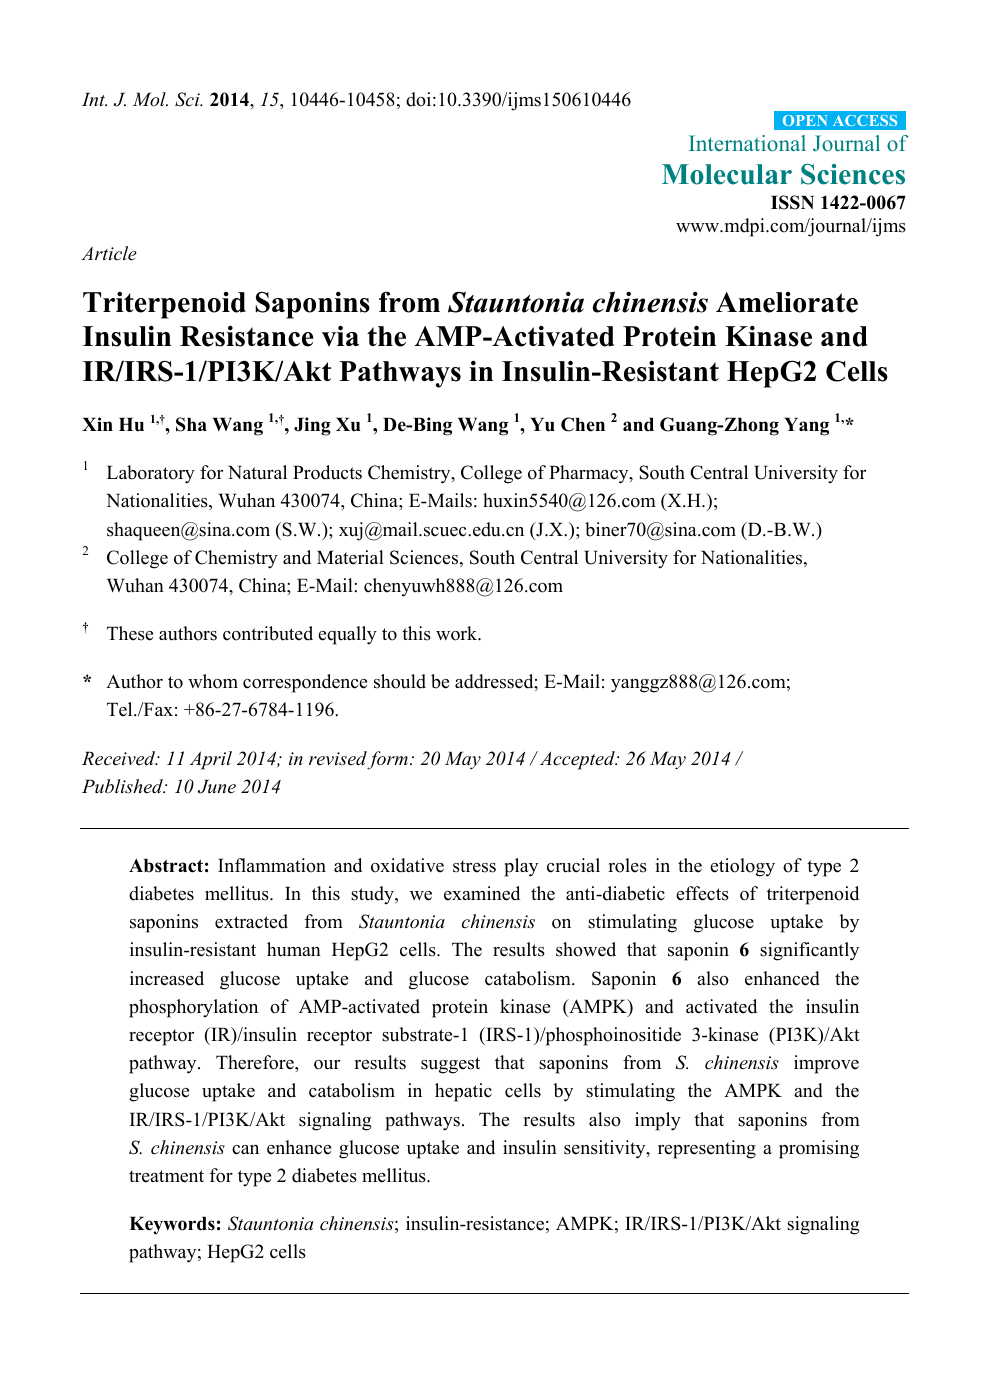 Triterpenoid Saponins From Stauntonia Chinensis Ameliorate Insulin Resistance Via The Amp Activated Protein Kinase And Ir Irs 1 Pi3k Akt Pathways In Insulin Resistant Hepg2 Cells Topic Of Research Paper In Biological Sciences Download Scholarly